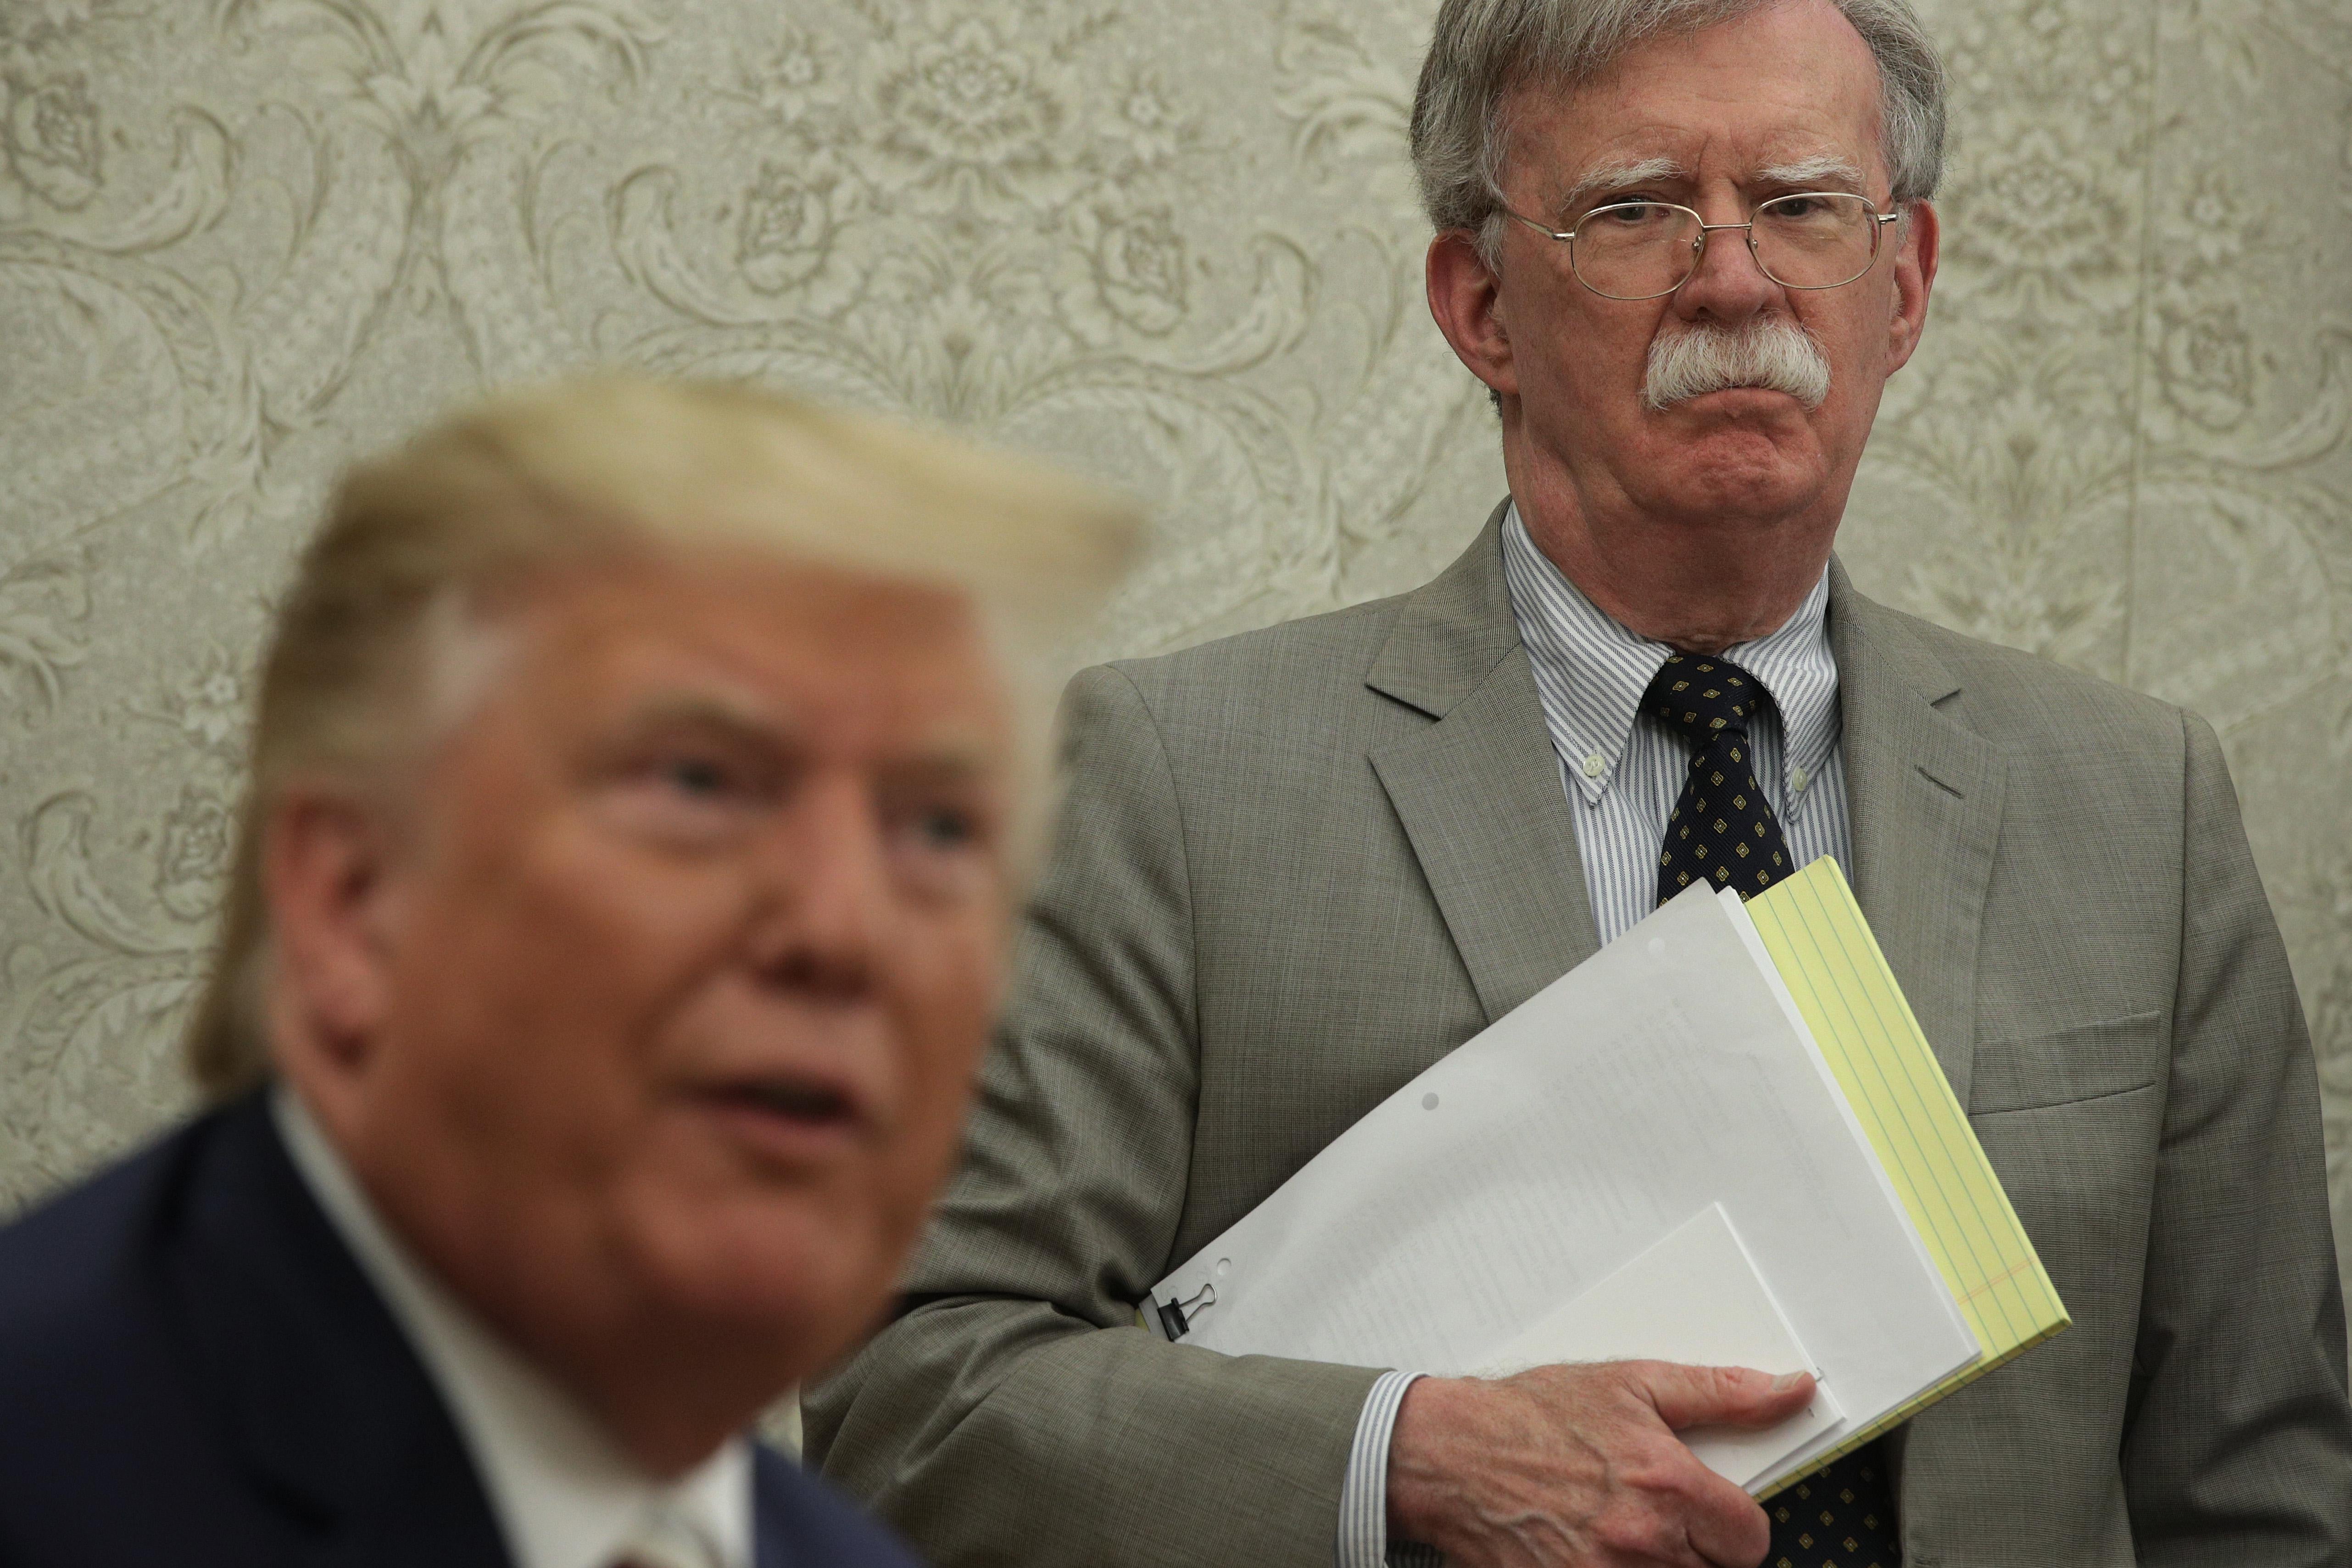 Bolton standing, holding papers, behind Trump, seated, who is speaking to the press